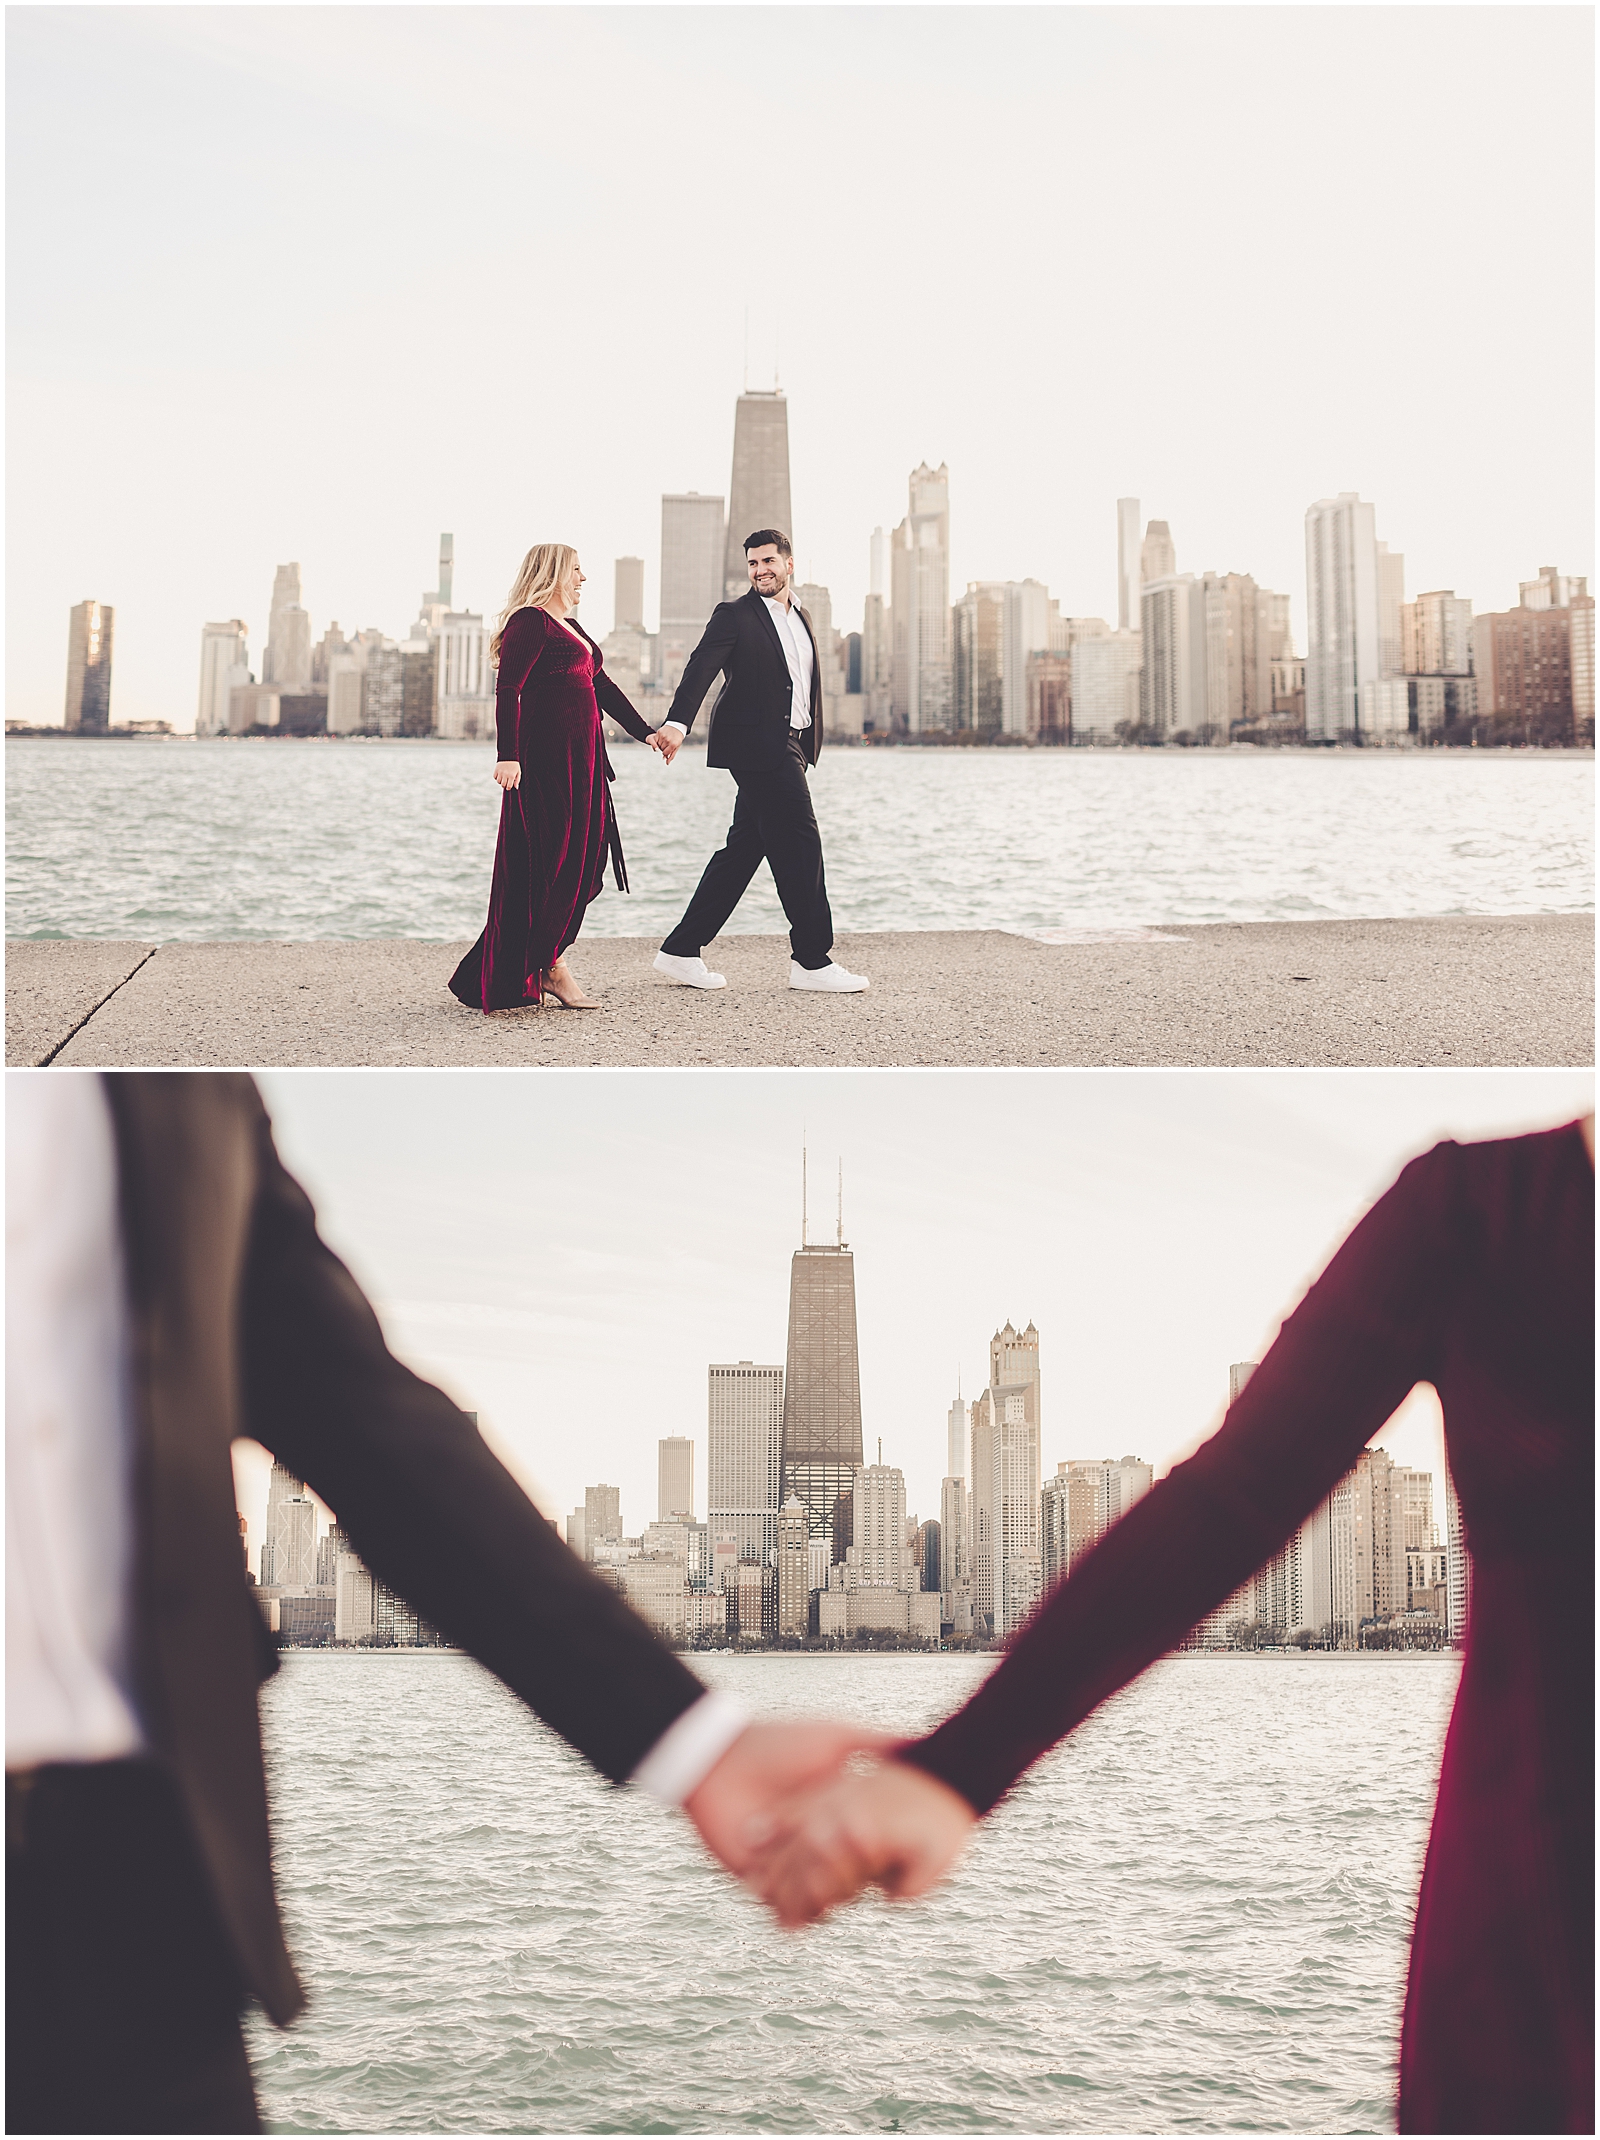 Andrea and Chris's Lincoln Park and North Avenue Beach engagement in Chicago, Illinois with Chicagoland photographer Kara Evans Photographer.